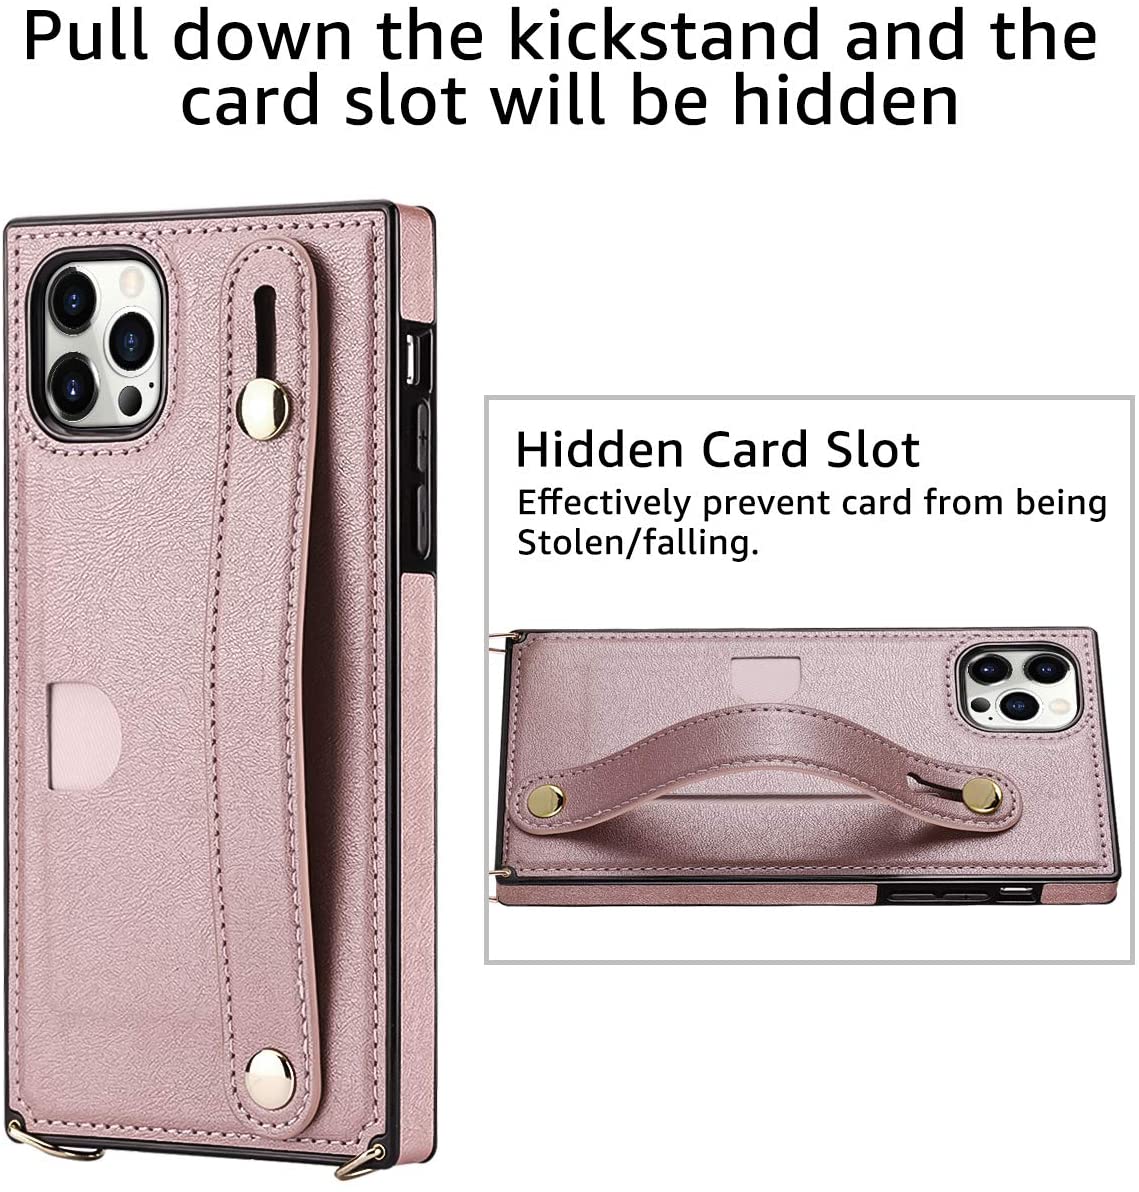 Compatible with iPhone 12 Pro Max Case-Wallet Case with Card Holder Kickstand Lanyard Neck Strap Adjustable Necklace Protective Cover Compatible with iPhone 12 Pro Max 6.7 inch 5G Rose Gold - image 3 of 3